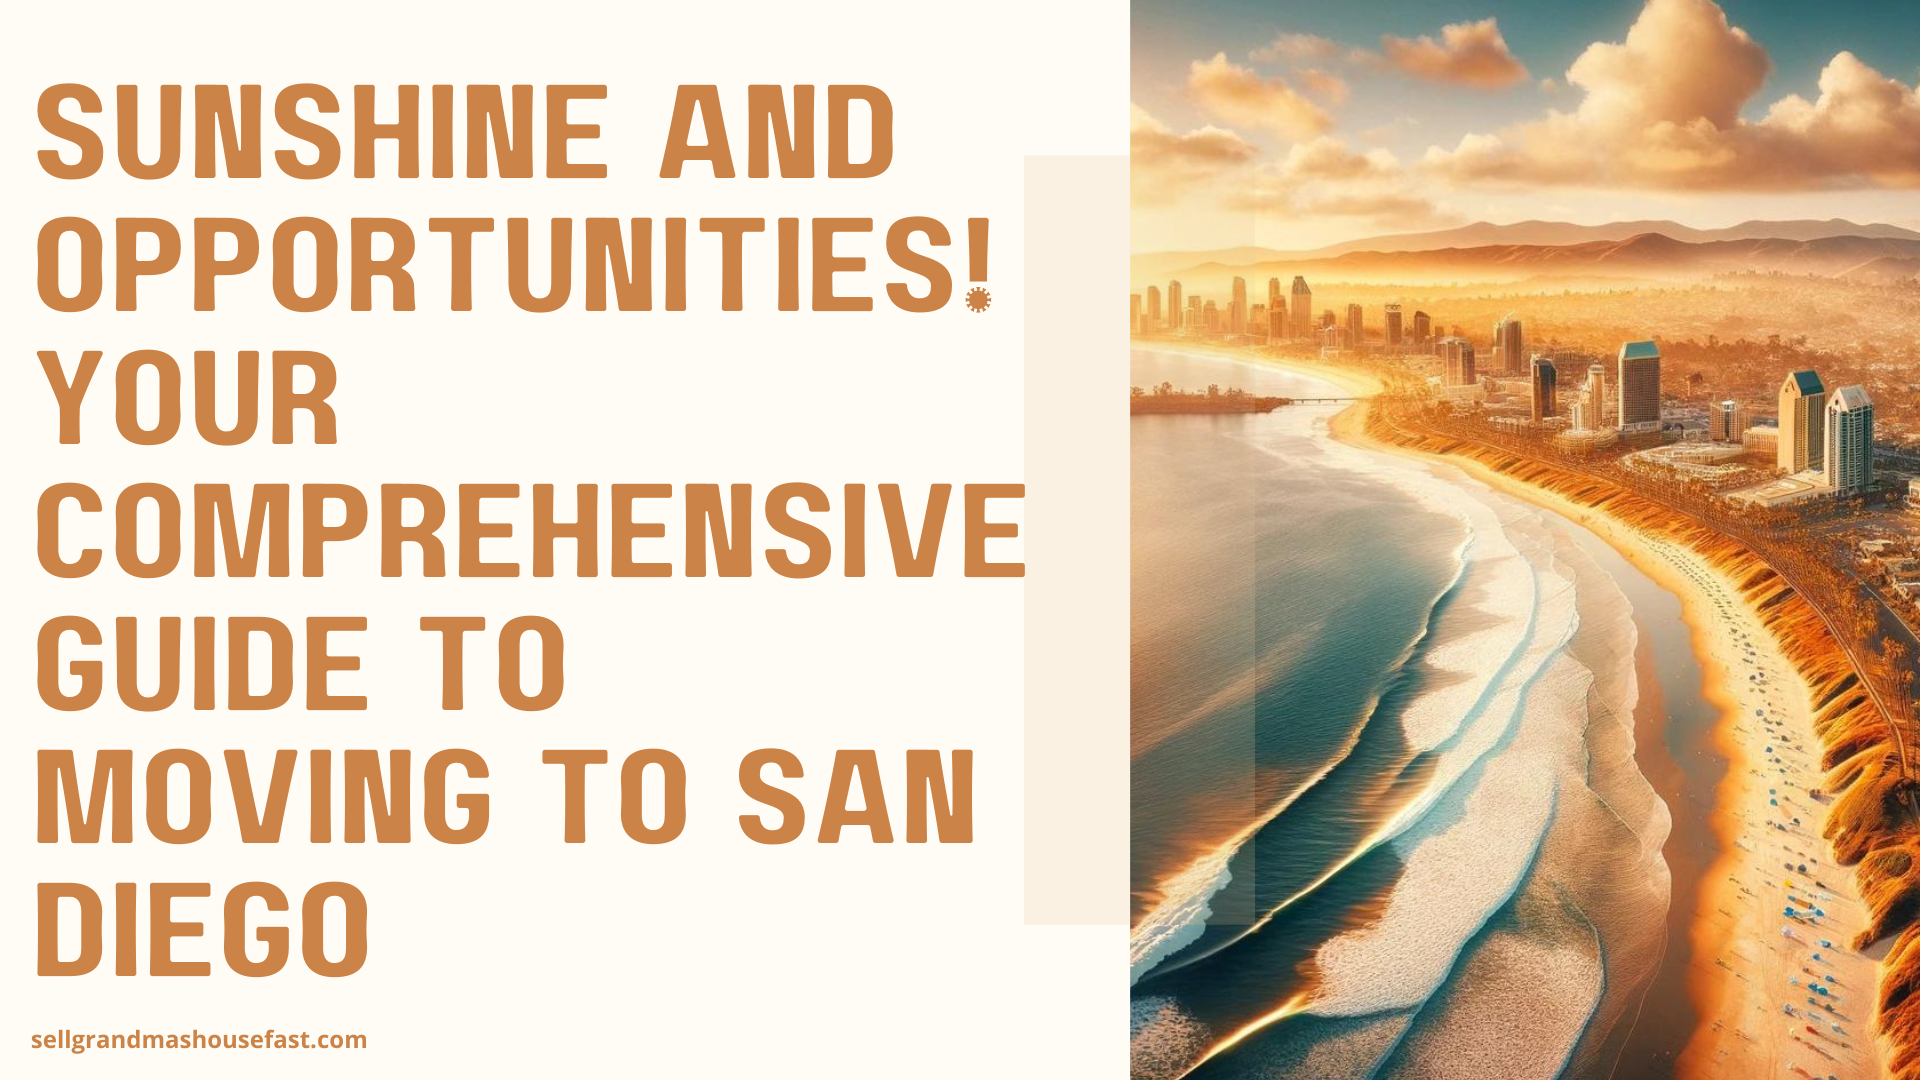 You are currently viewing Sunshine and Opportunities! Your Comprehensive Guide to Moving to San Diego